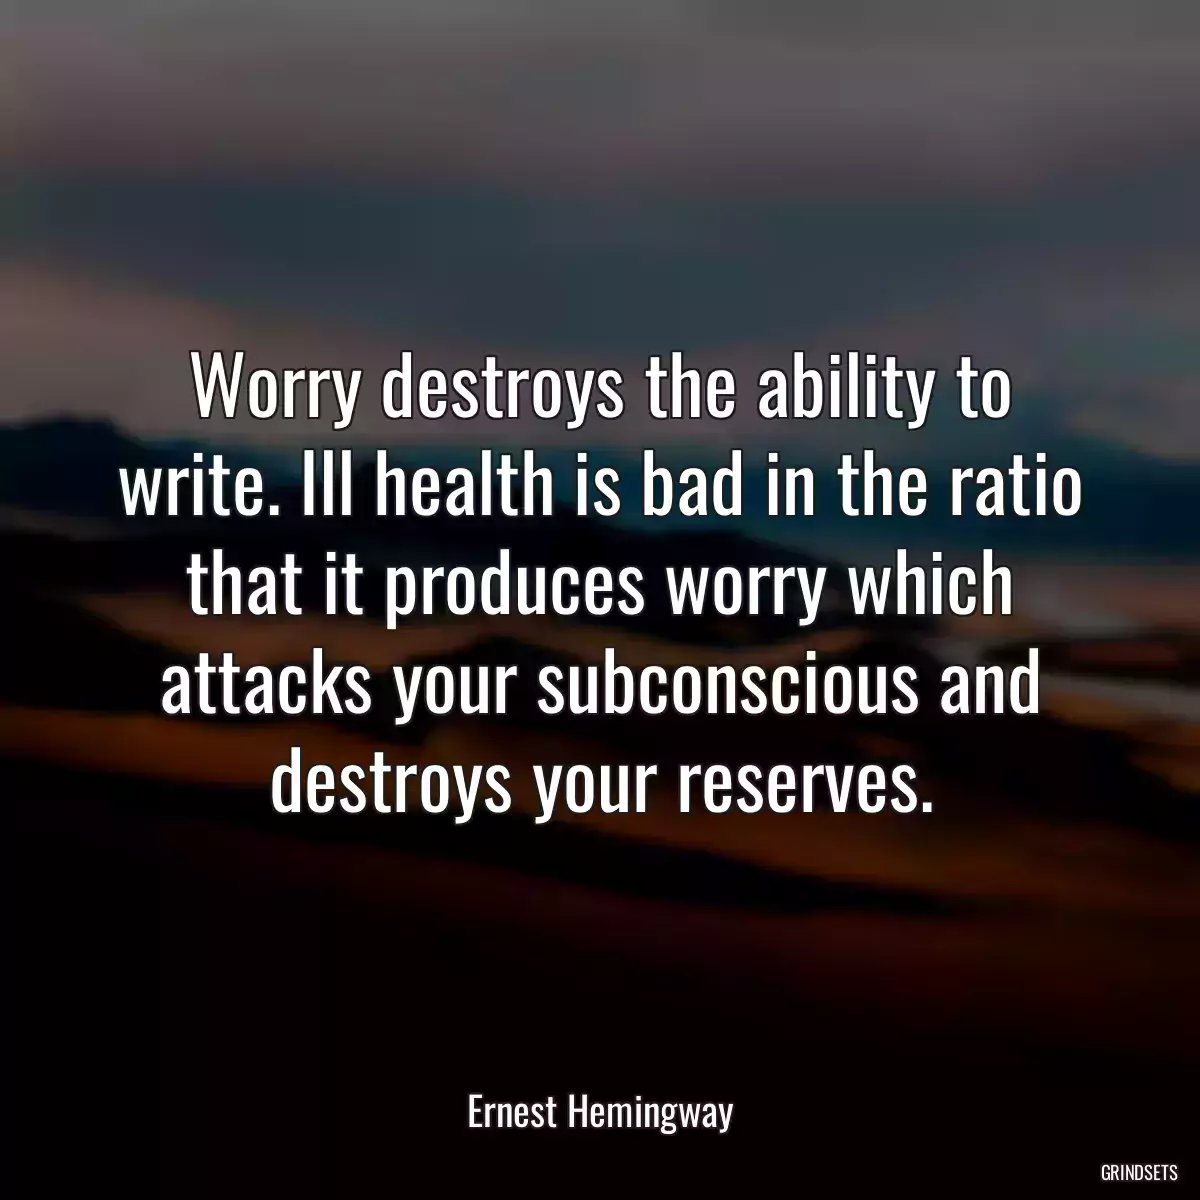 Worry destroys the ability to write. Ill health is bad in the ratio that it produces worry which attacks your subconscious and destroys your reserves.